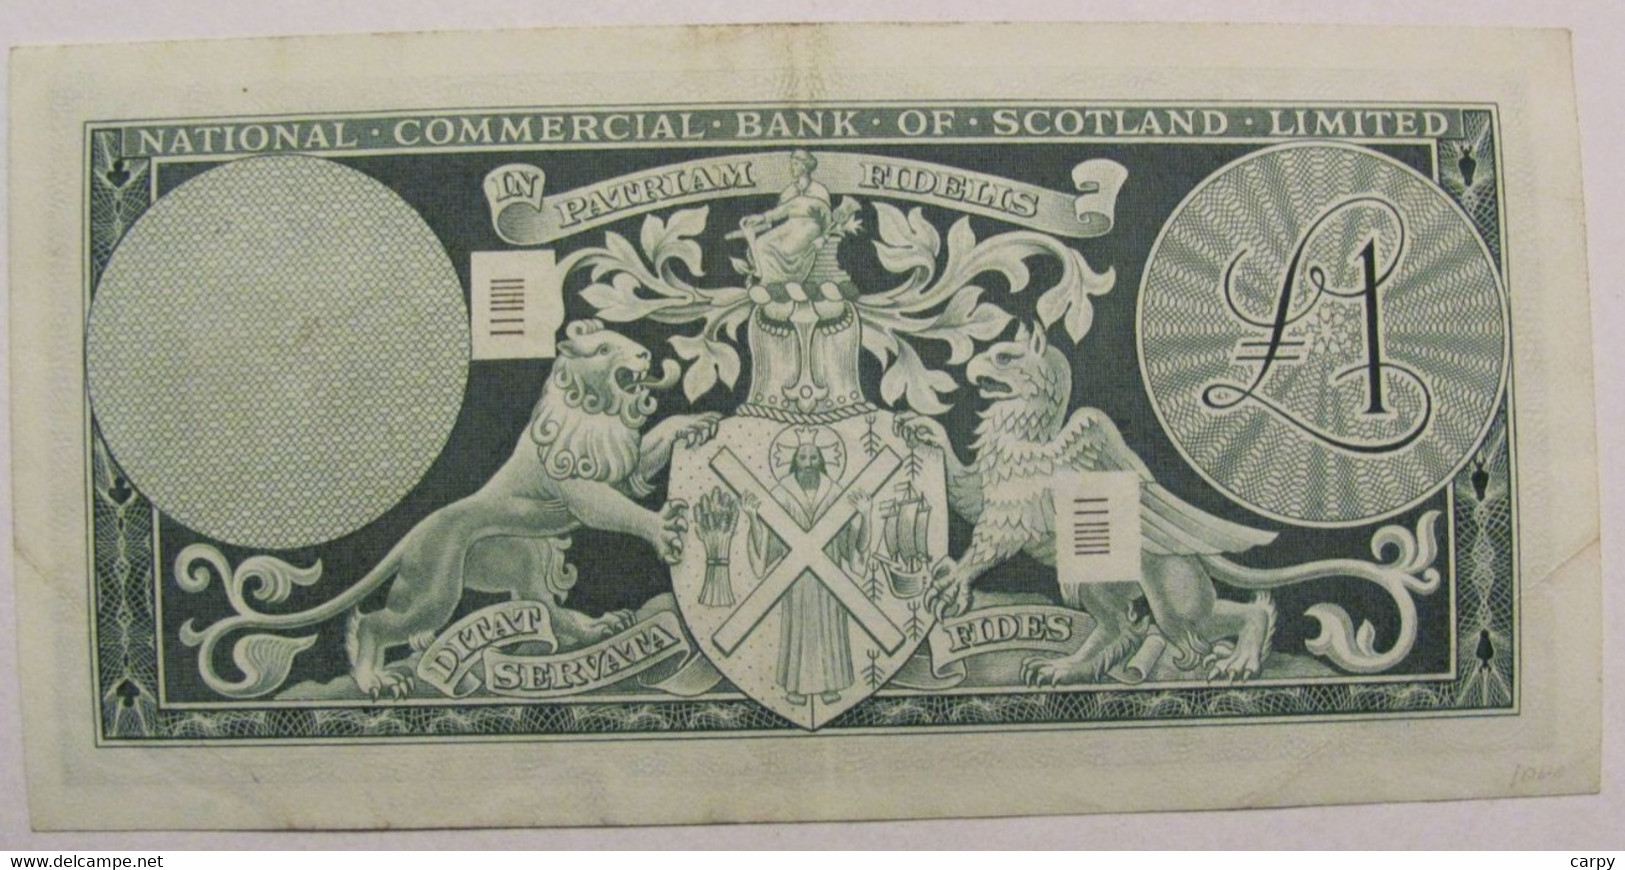 Pound 04 - Th Of January 1968 / THE NATIONAL COMMERCIAL BANK Of SCOTLAND Ltd / Very Nice Looking / RARE - 1 Pond